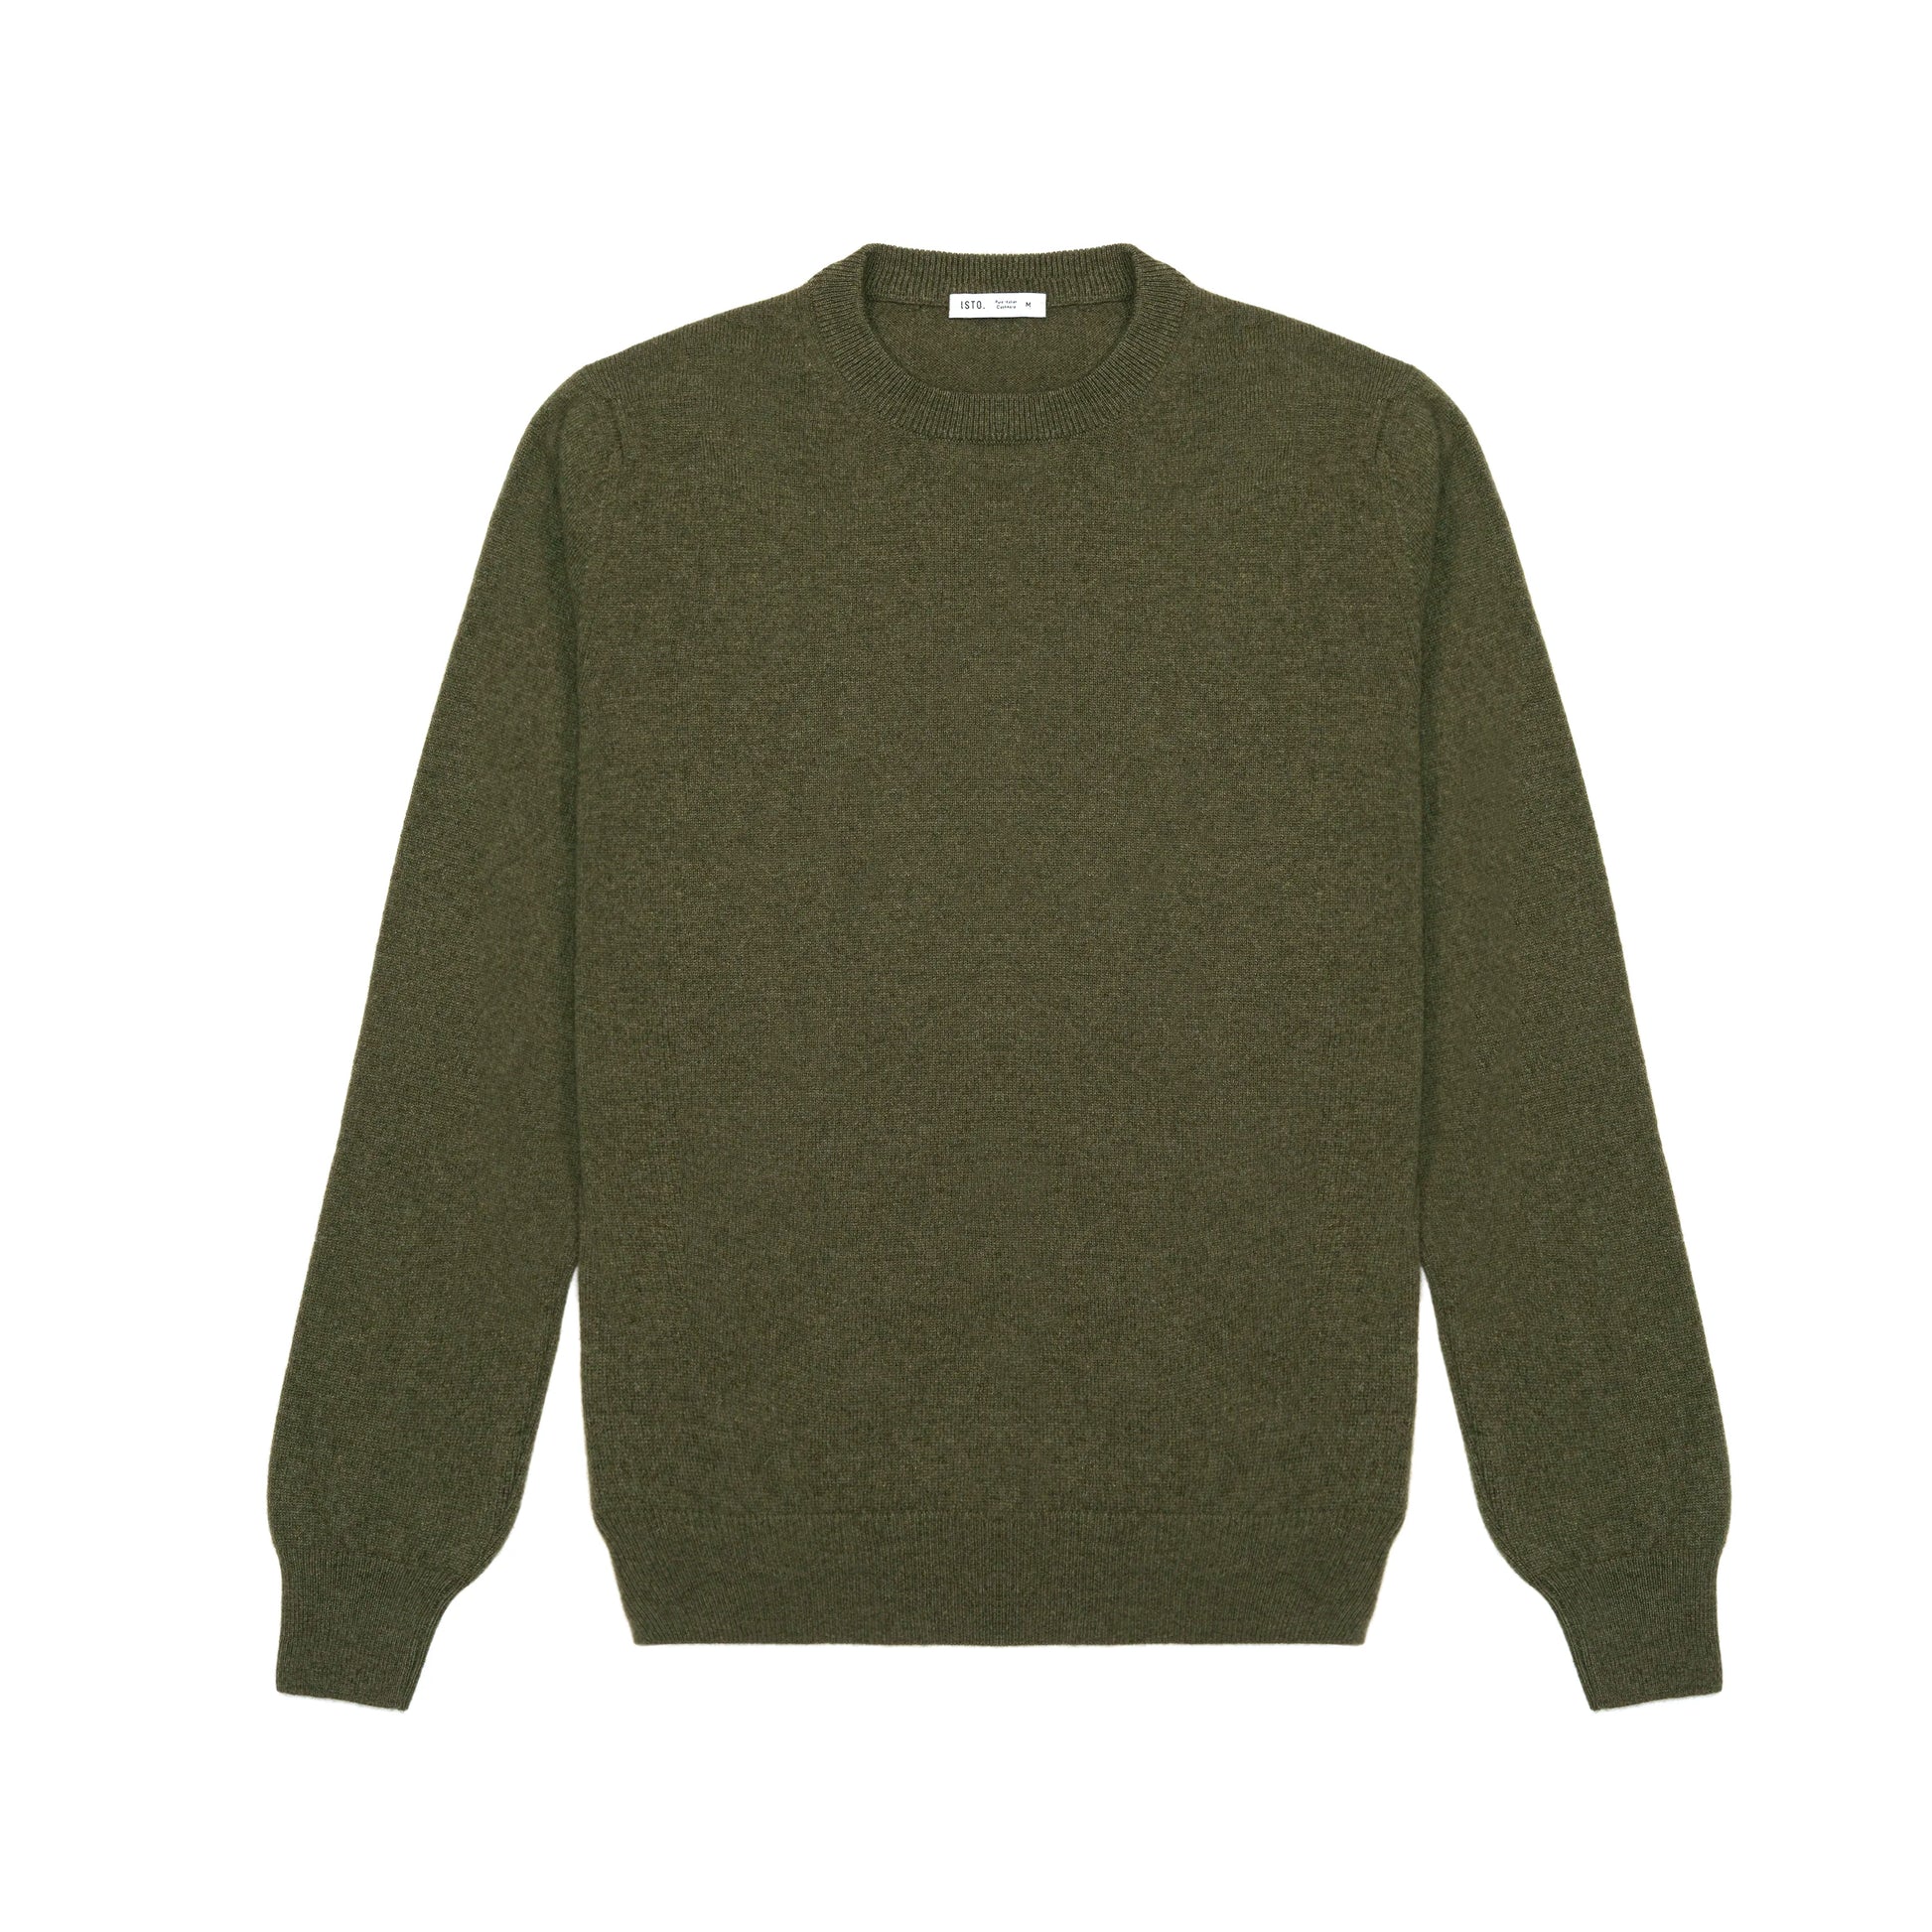 CASHMERE SWEATER Knitwear ISTO. store Green S 